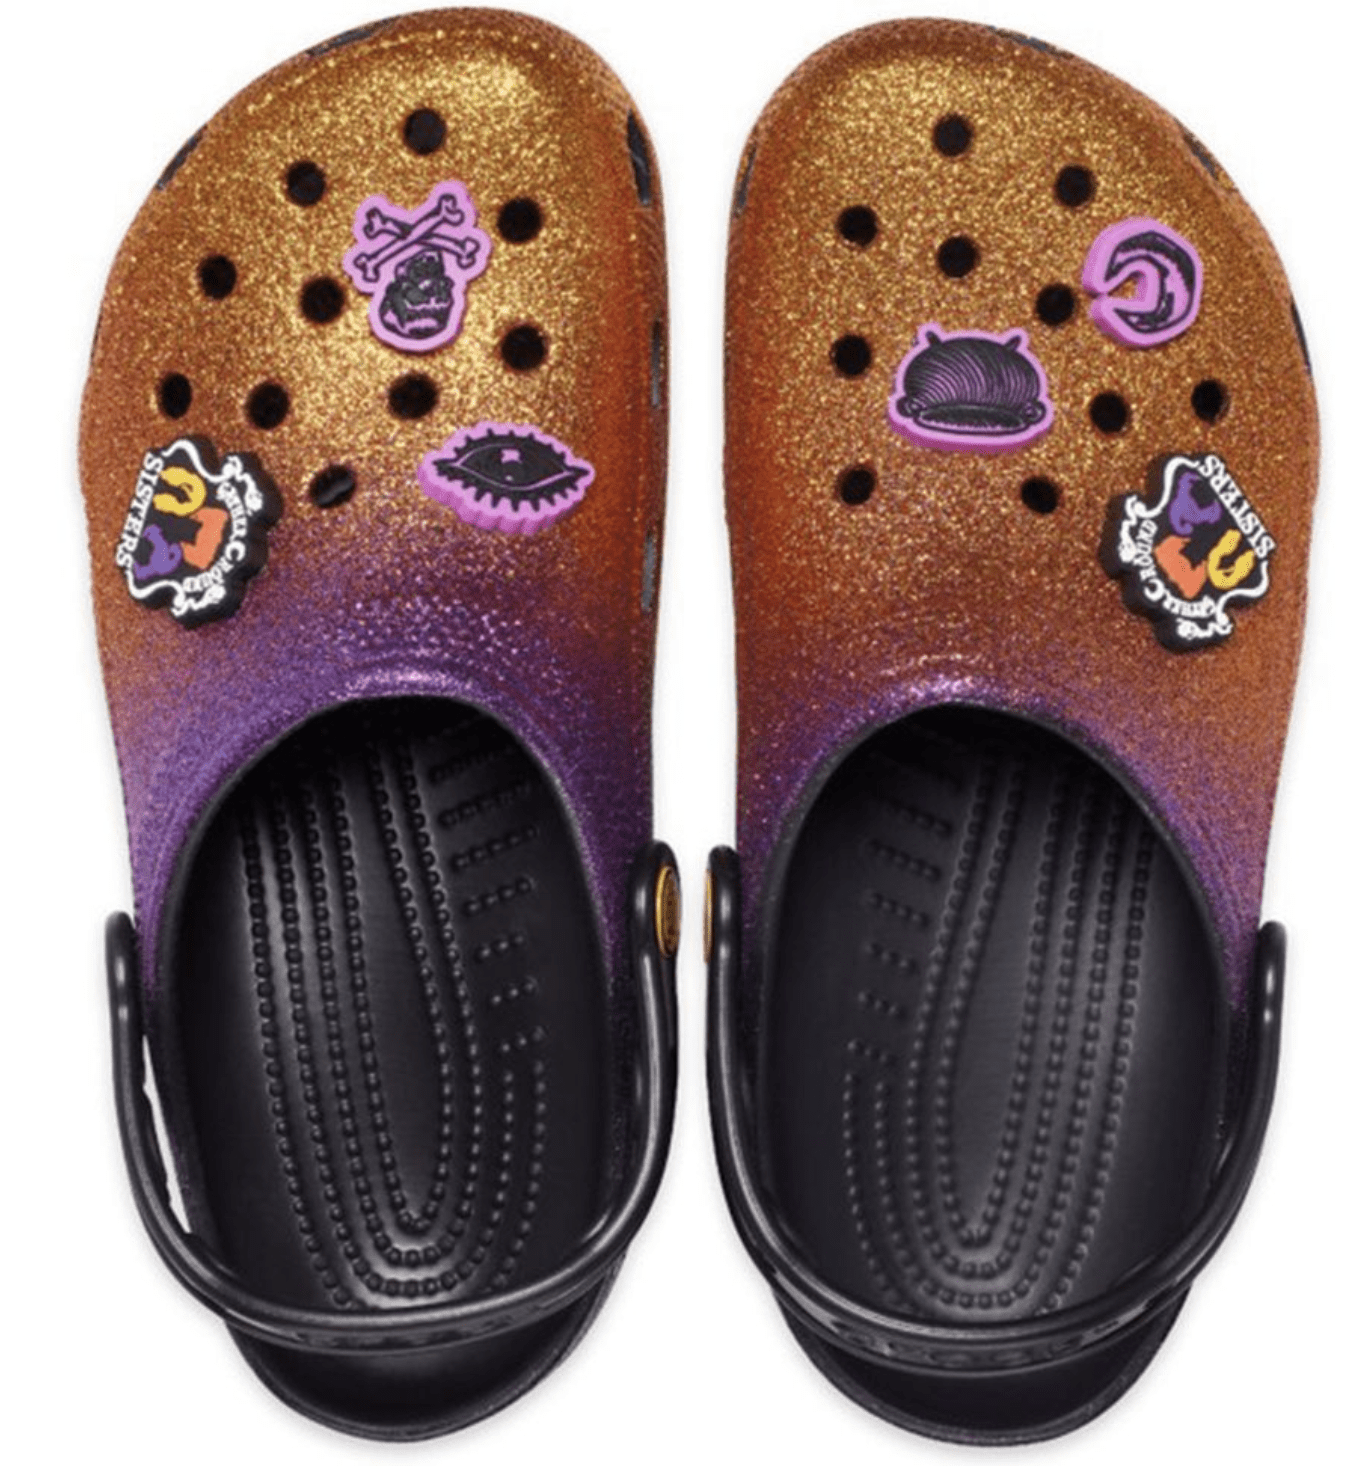 New Disney Parks Mickey Halloween Crocs M 7 W 9 With Tags Light Up In Hand 